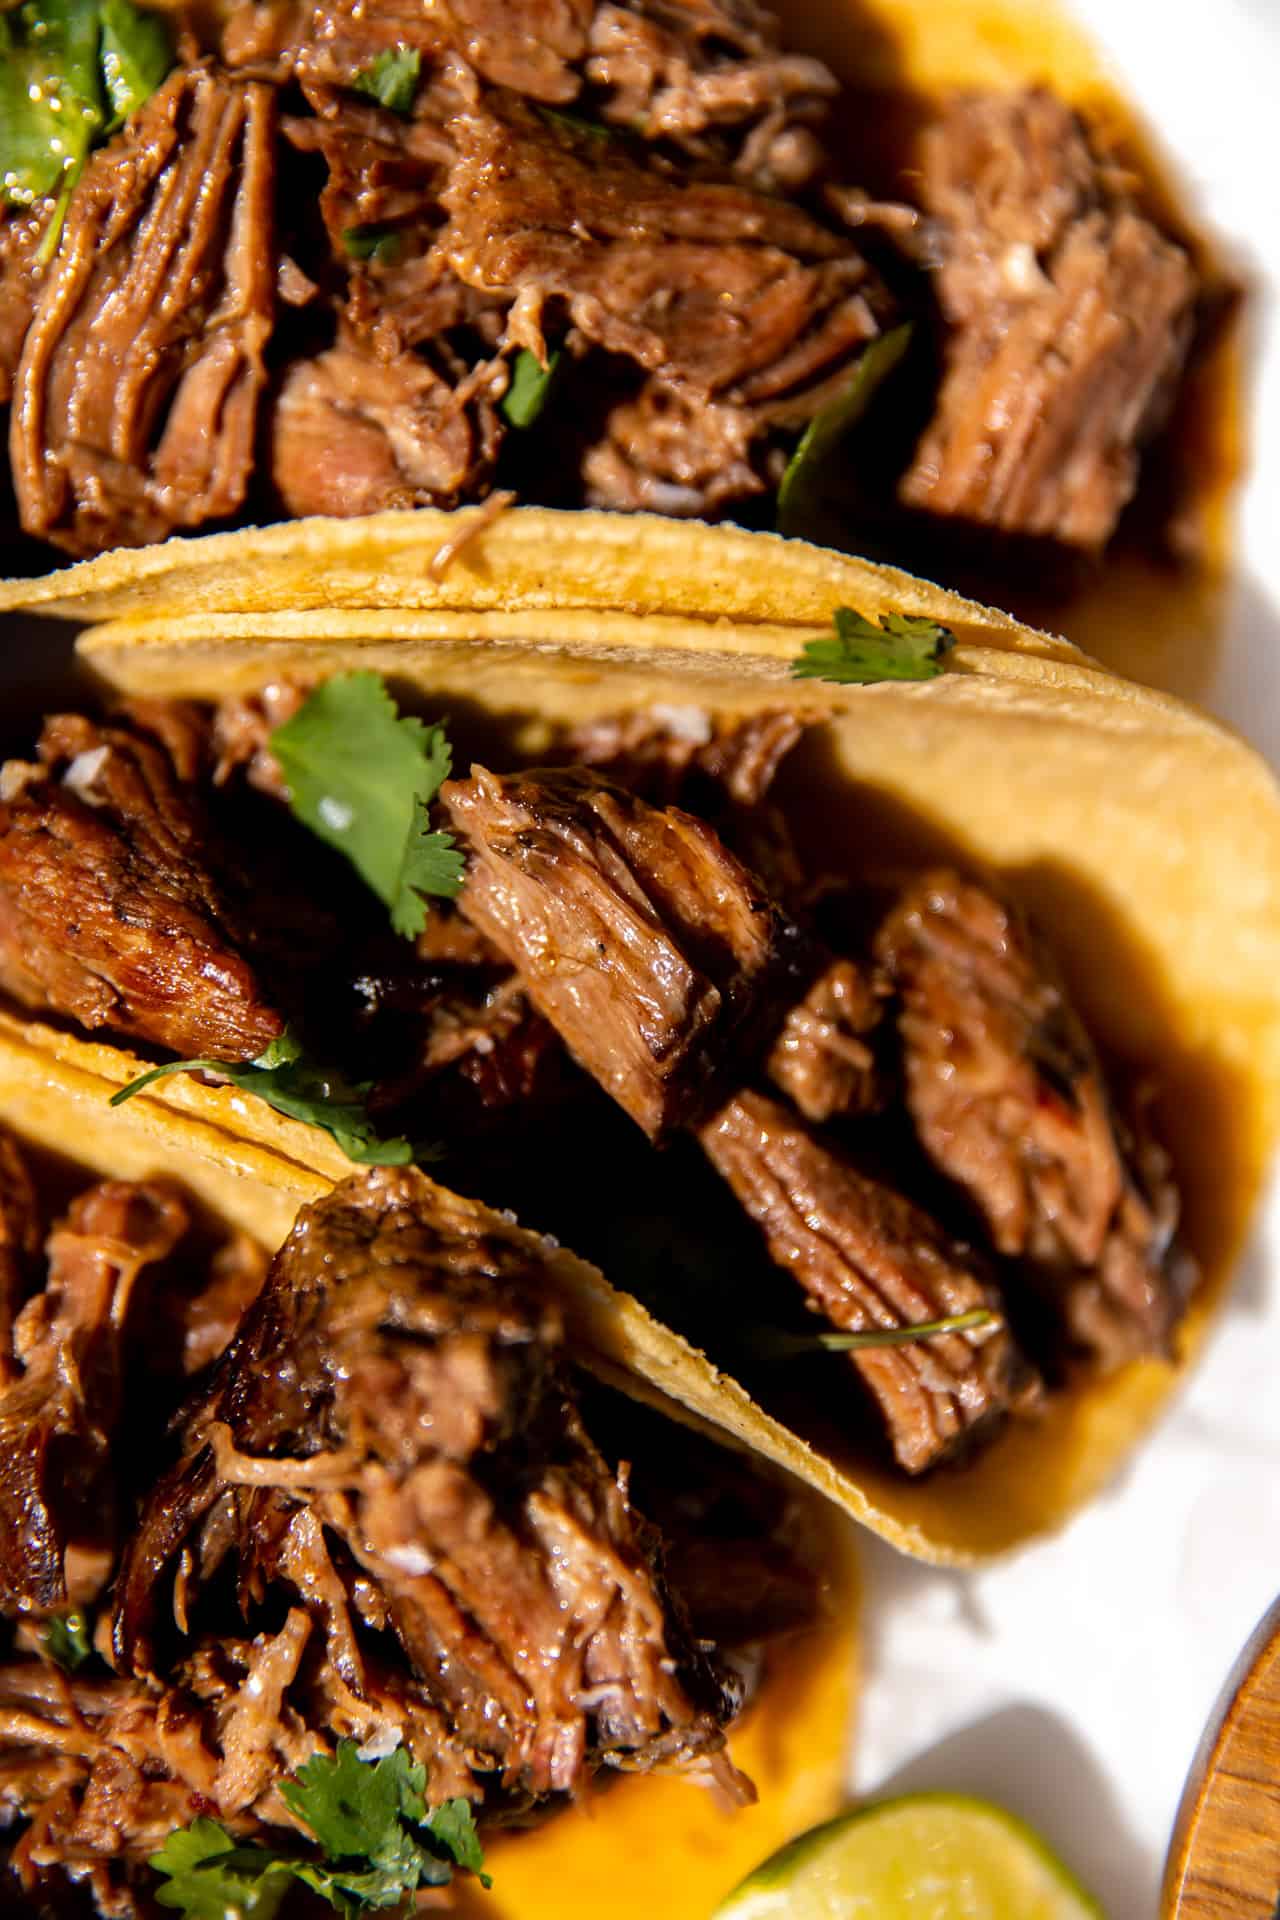 Shredded beef tacos on corn tortillas with cilantro and lime.